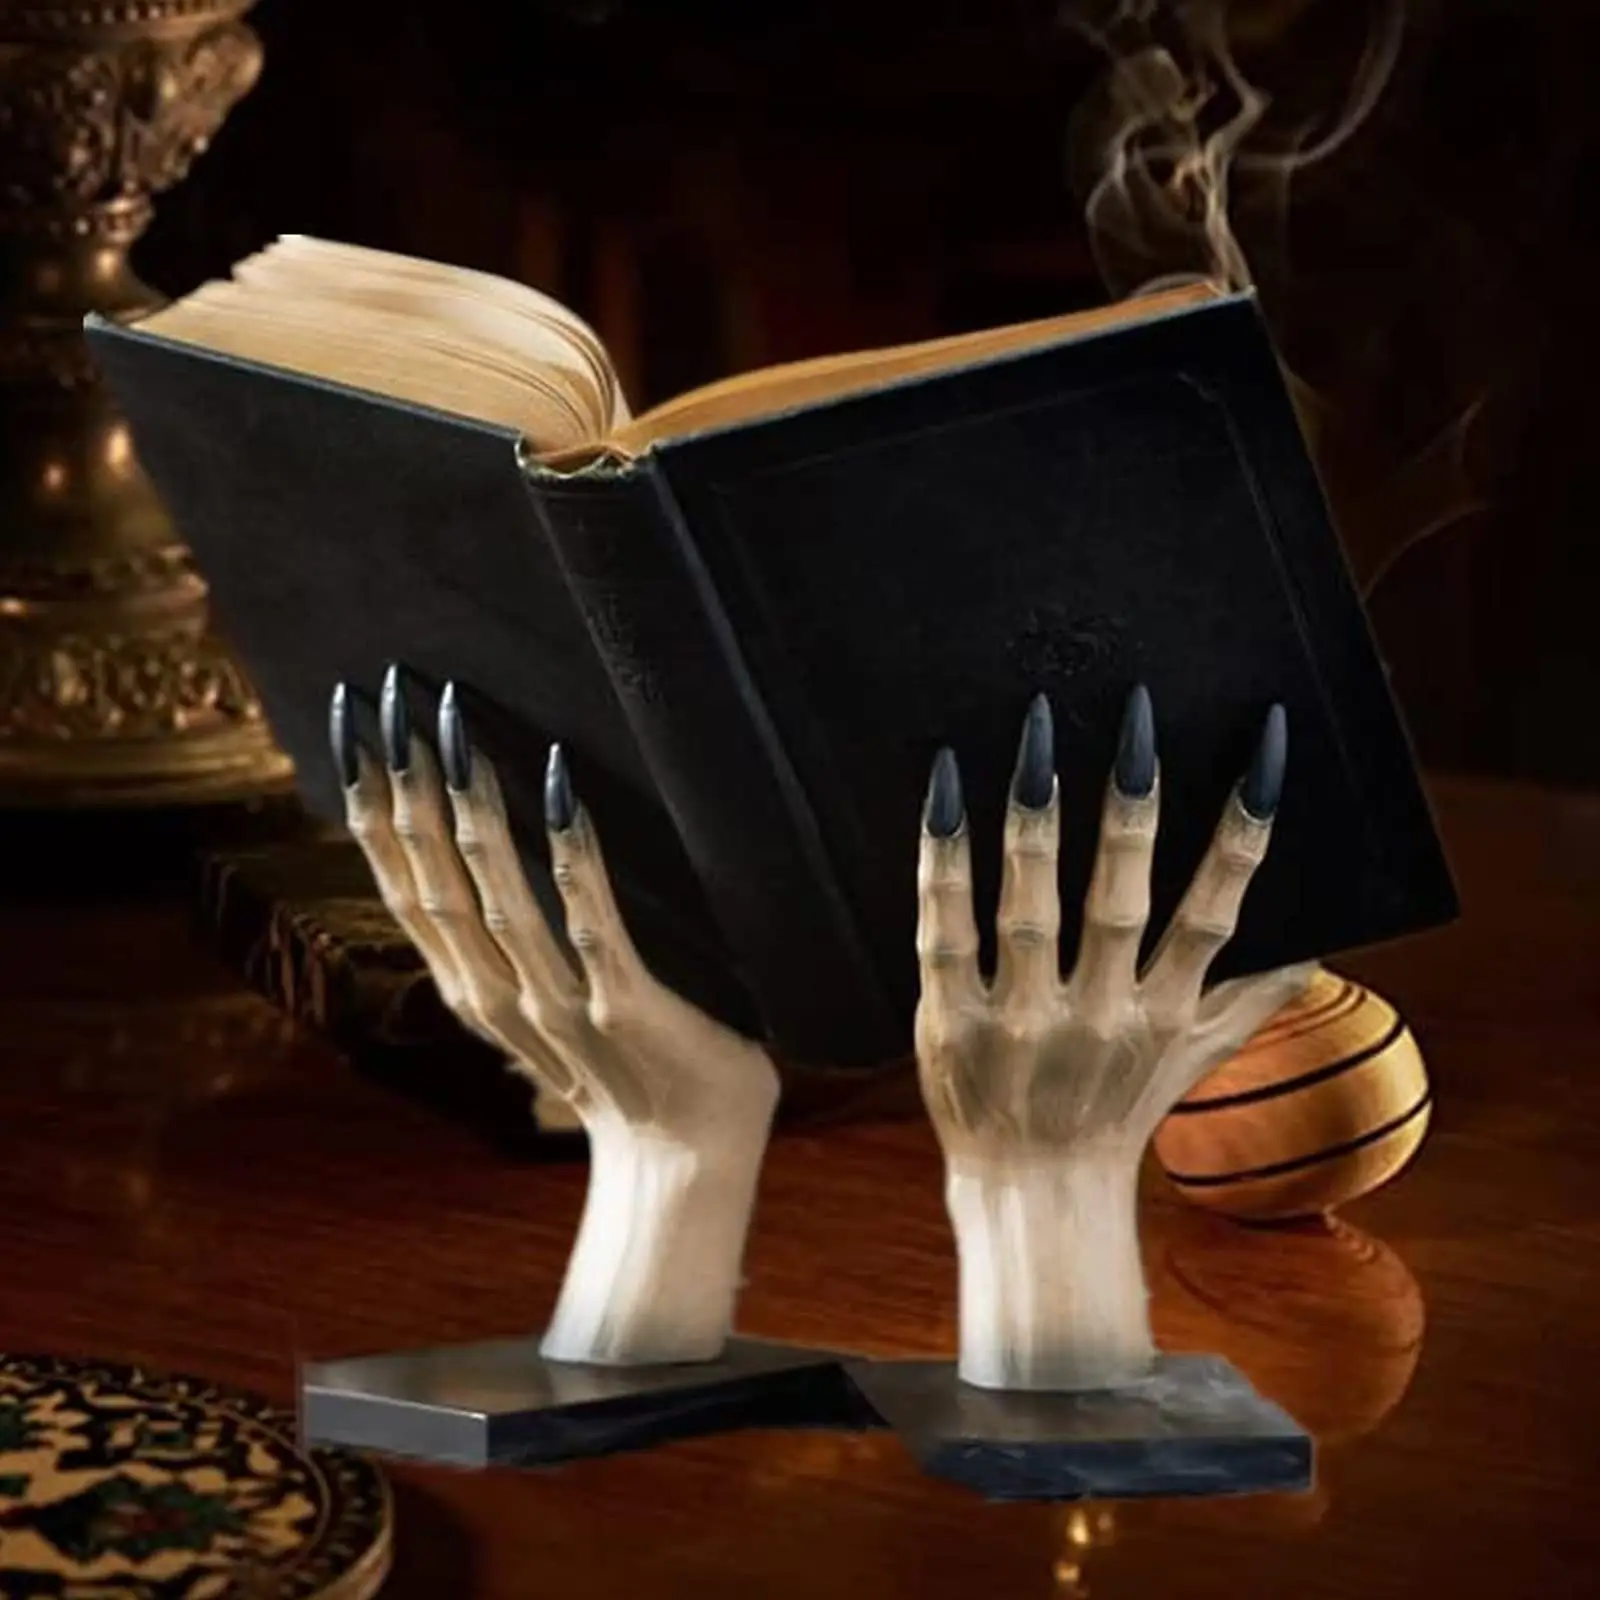 Halloween Bookends Decor Gothic Home Decor Bookends Shelves Unique Scary Monster Hand Book Ends Spooky Halloween Room Decor book yazı desenli modbook ends universal metal bookends for shelves heavy duty metal non skid bookend supports book shelf